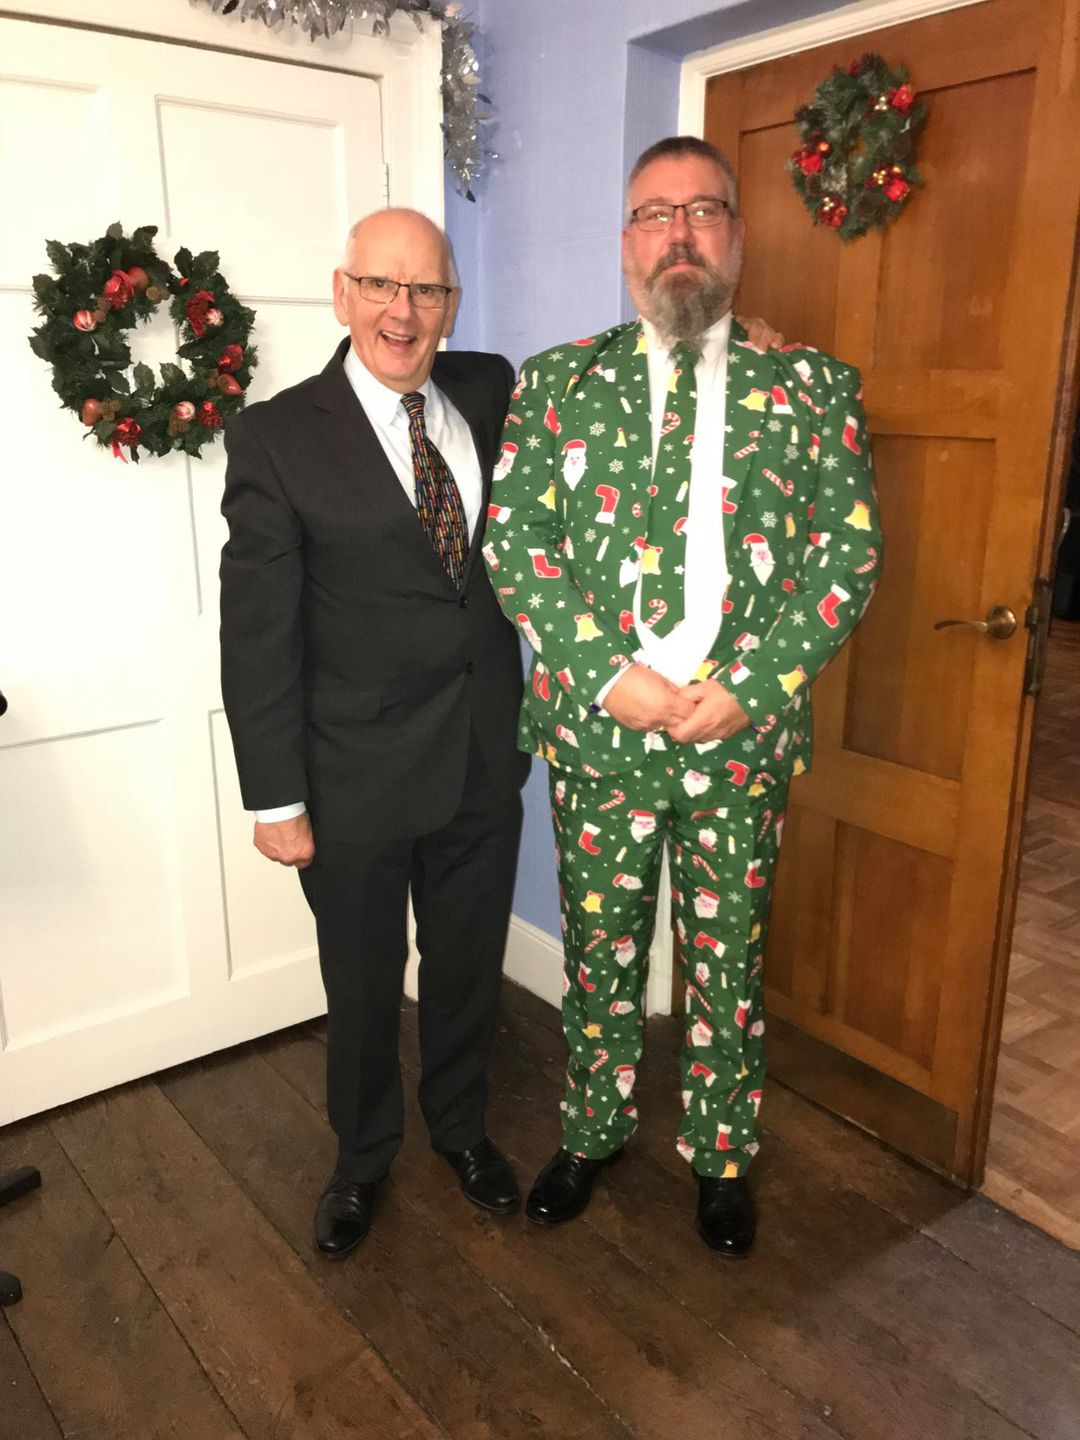 Our Immediate Past Master wearing his Christmas suit